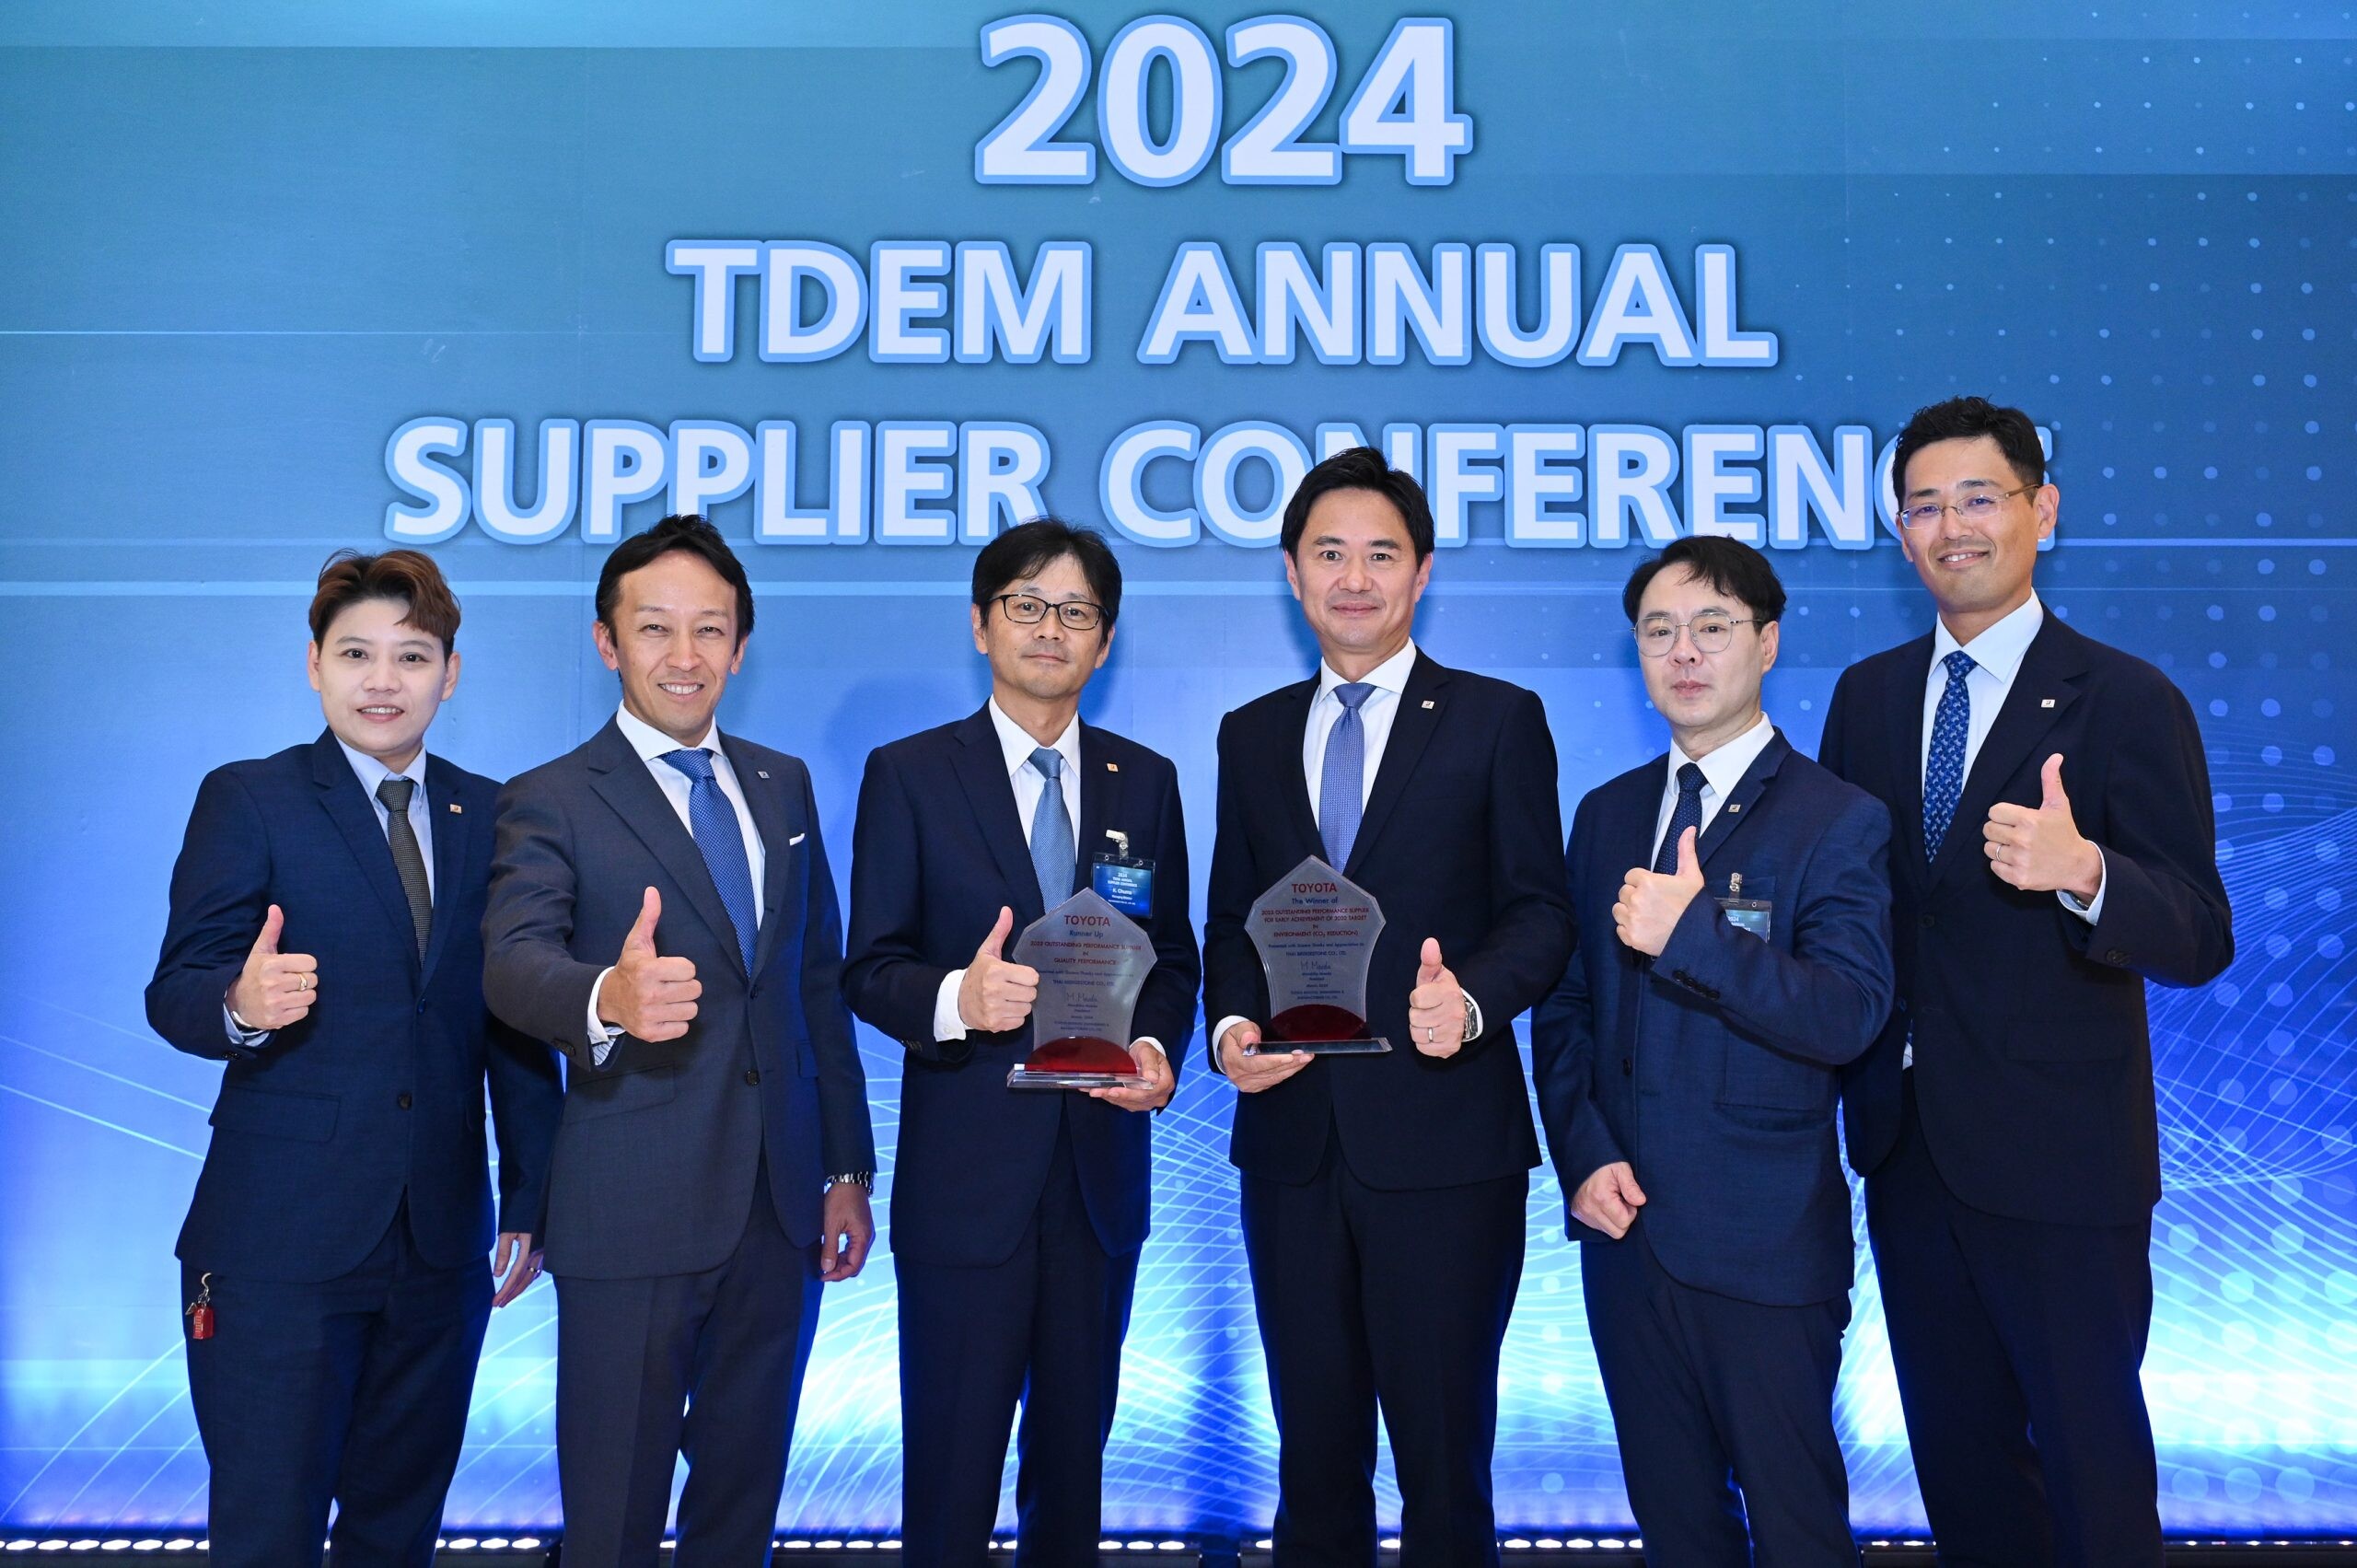 Bridgestone Receives Two Honorary Awards from "2024 TDEM ANNUAL SUPPLIER CONFERENCE", Reinforcing Strong Partnership for Sustainable Growth with TDEM